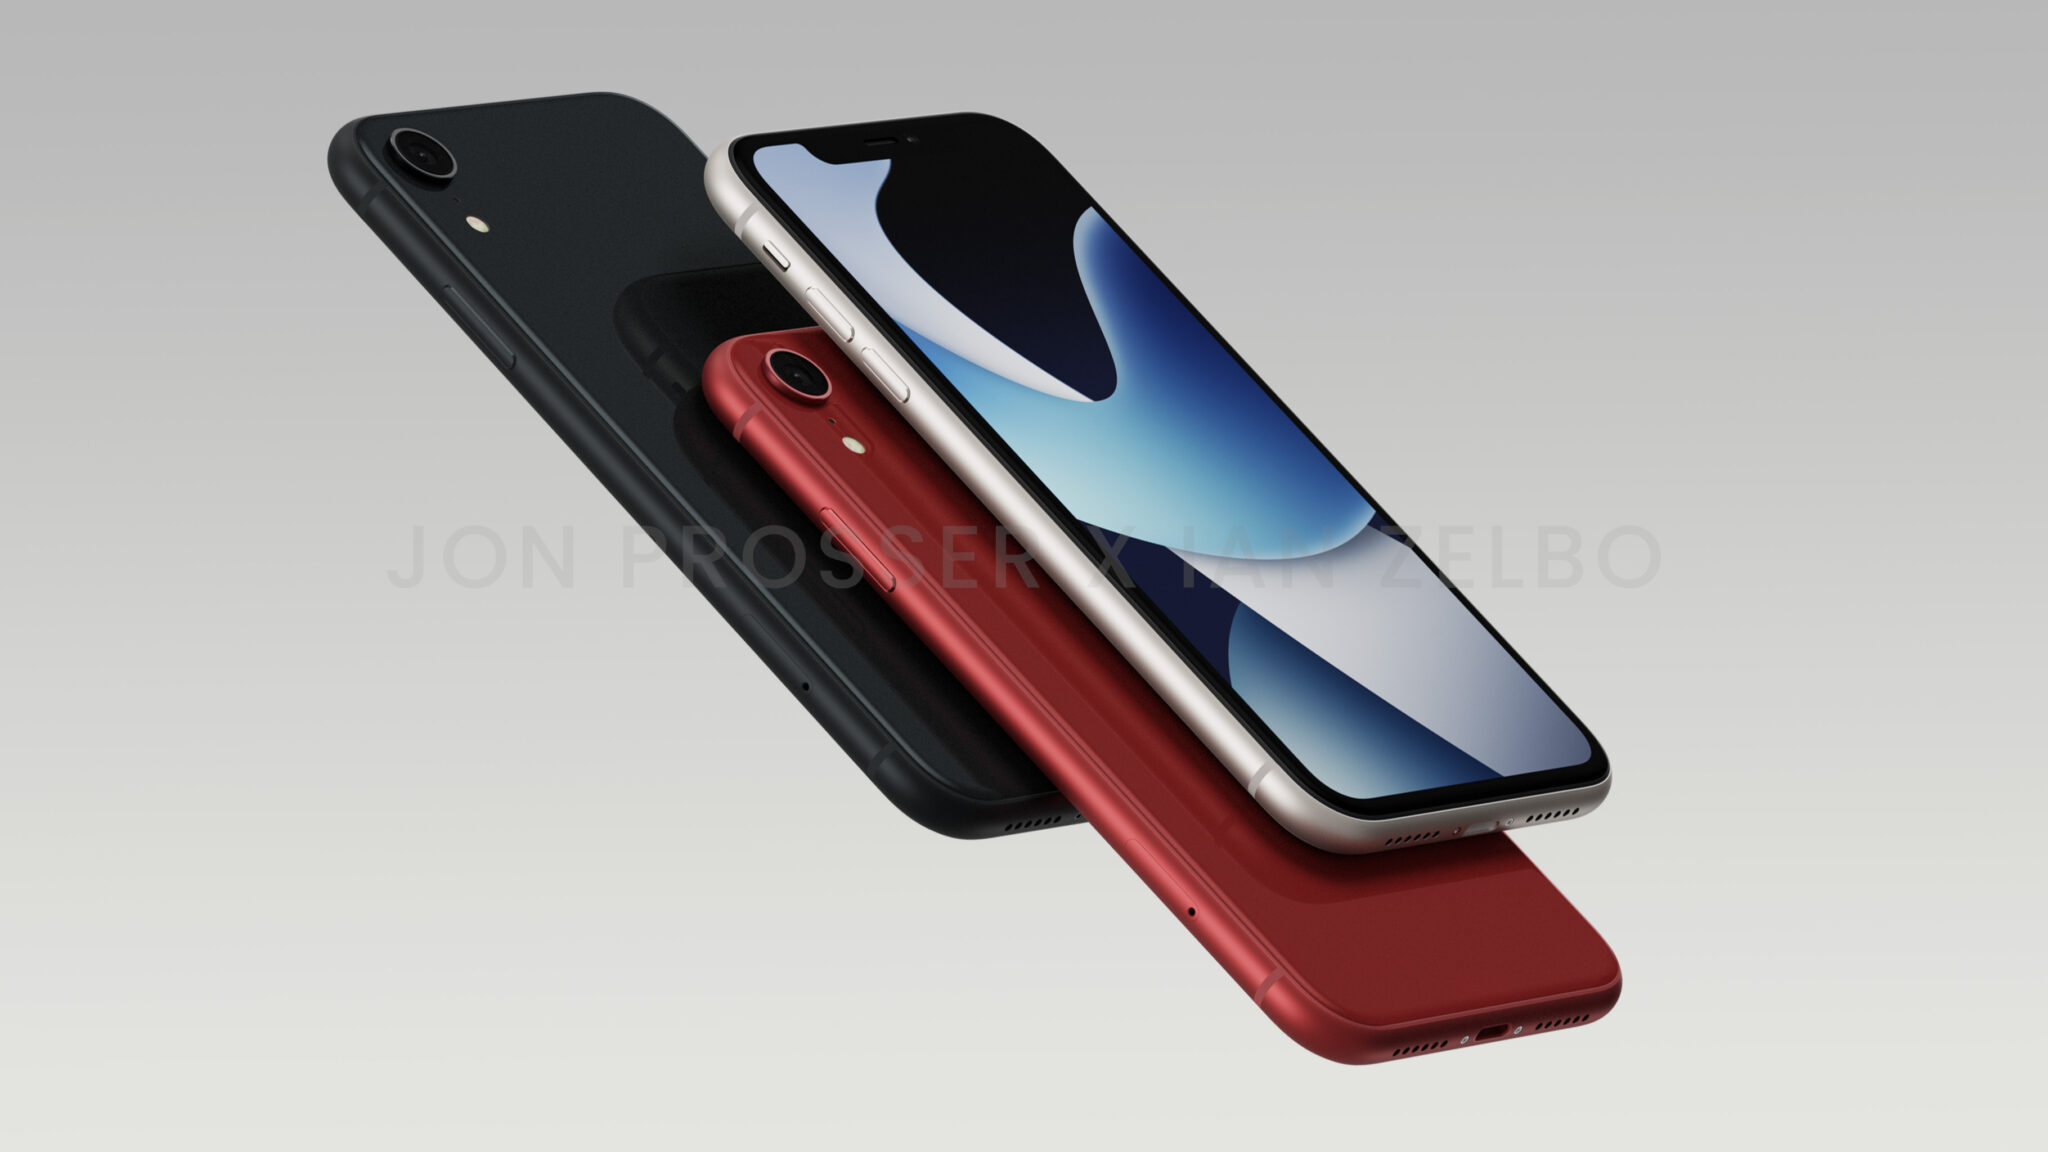 Prosser: iPhone SE 4 to Use iPhone XR’s Design